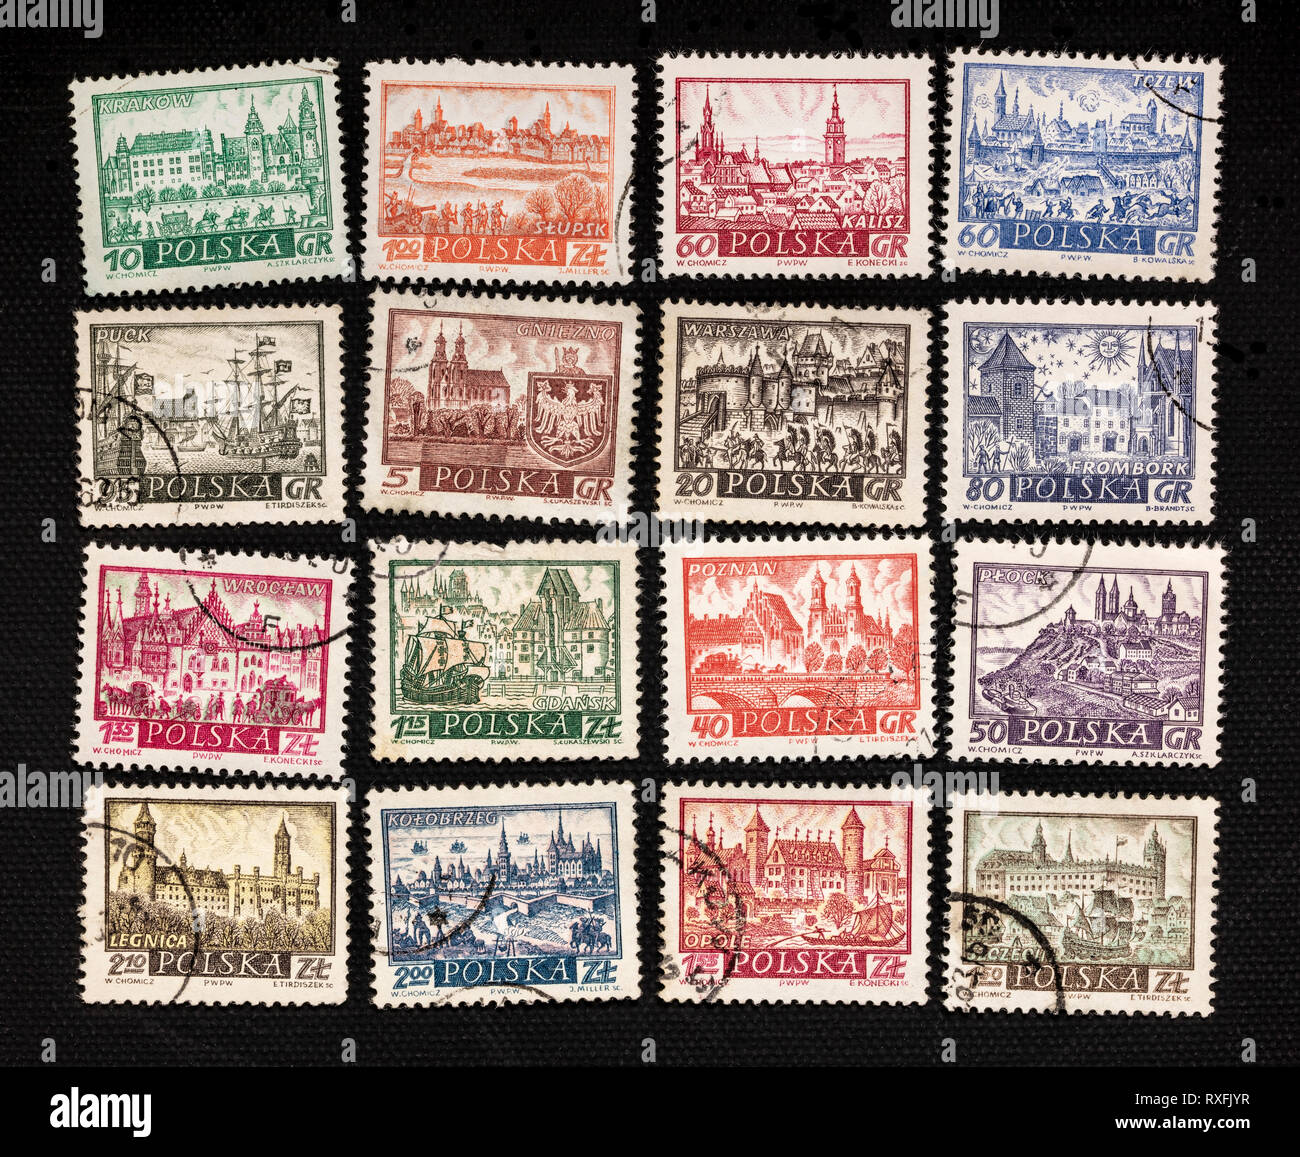 Postage Stamps From Usa 1960s Stock Photo - Download Image Now